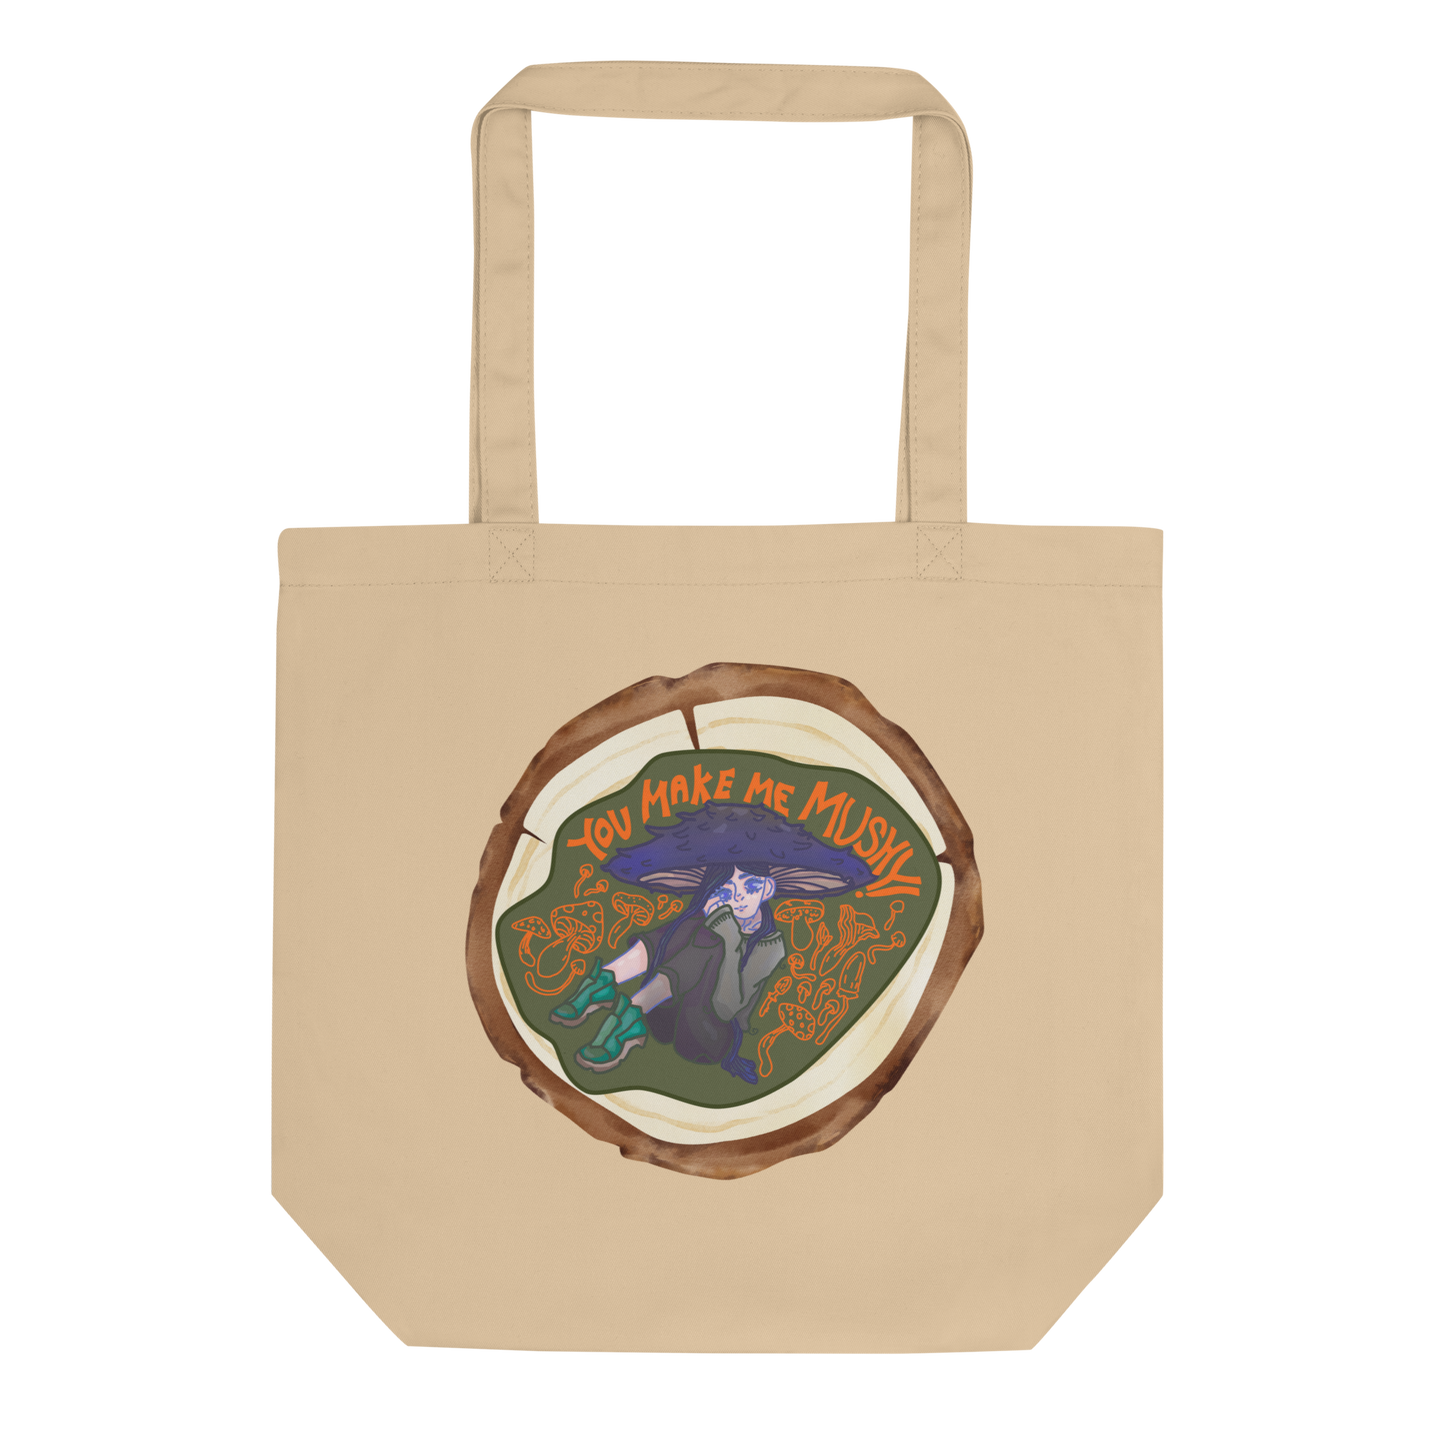 Lay-flat view of the 'You Make Me Mushy' Tote in oyster, featuring the vibrant watercolor design of the mushroom girl and her whimsical world, a delightful addition to any eco-conscious fashion ensemble.